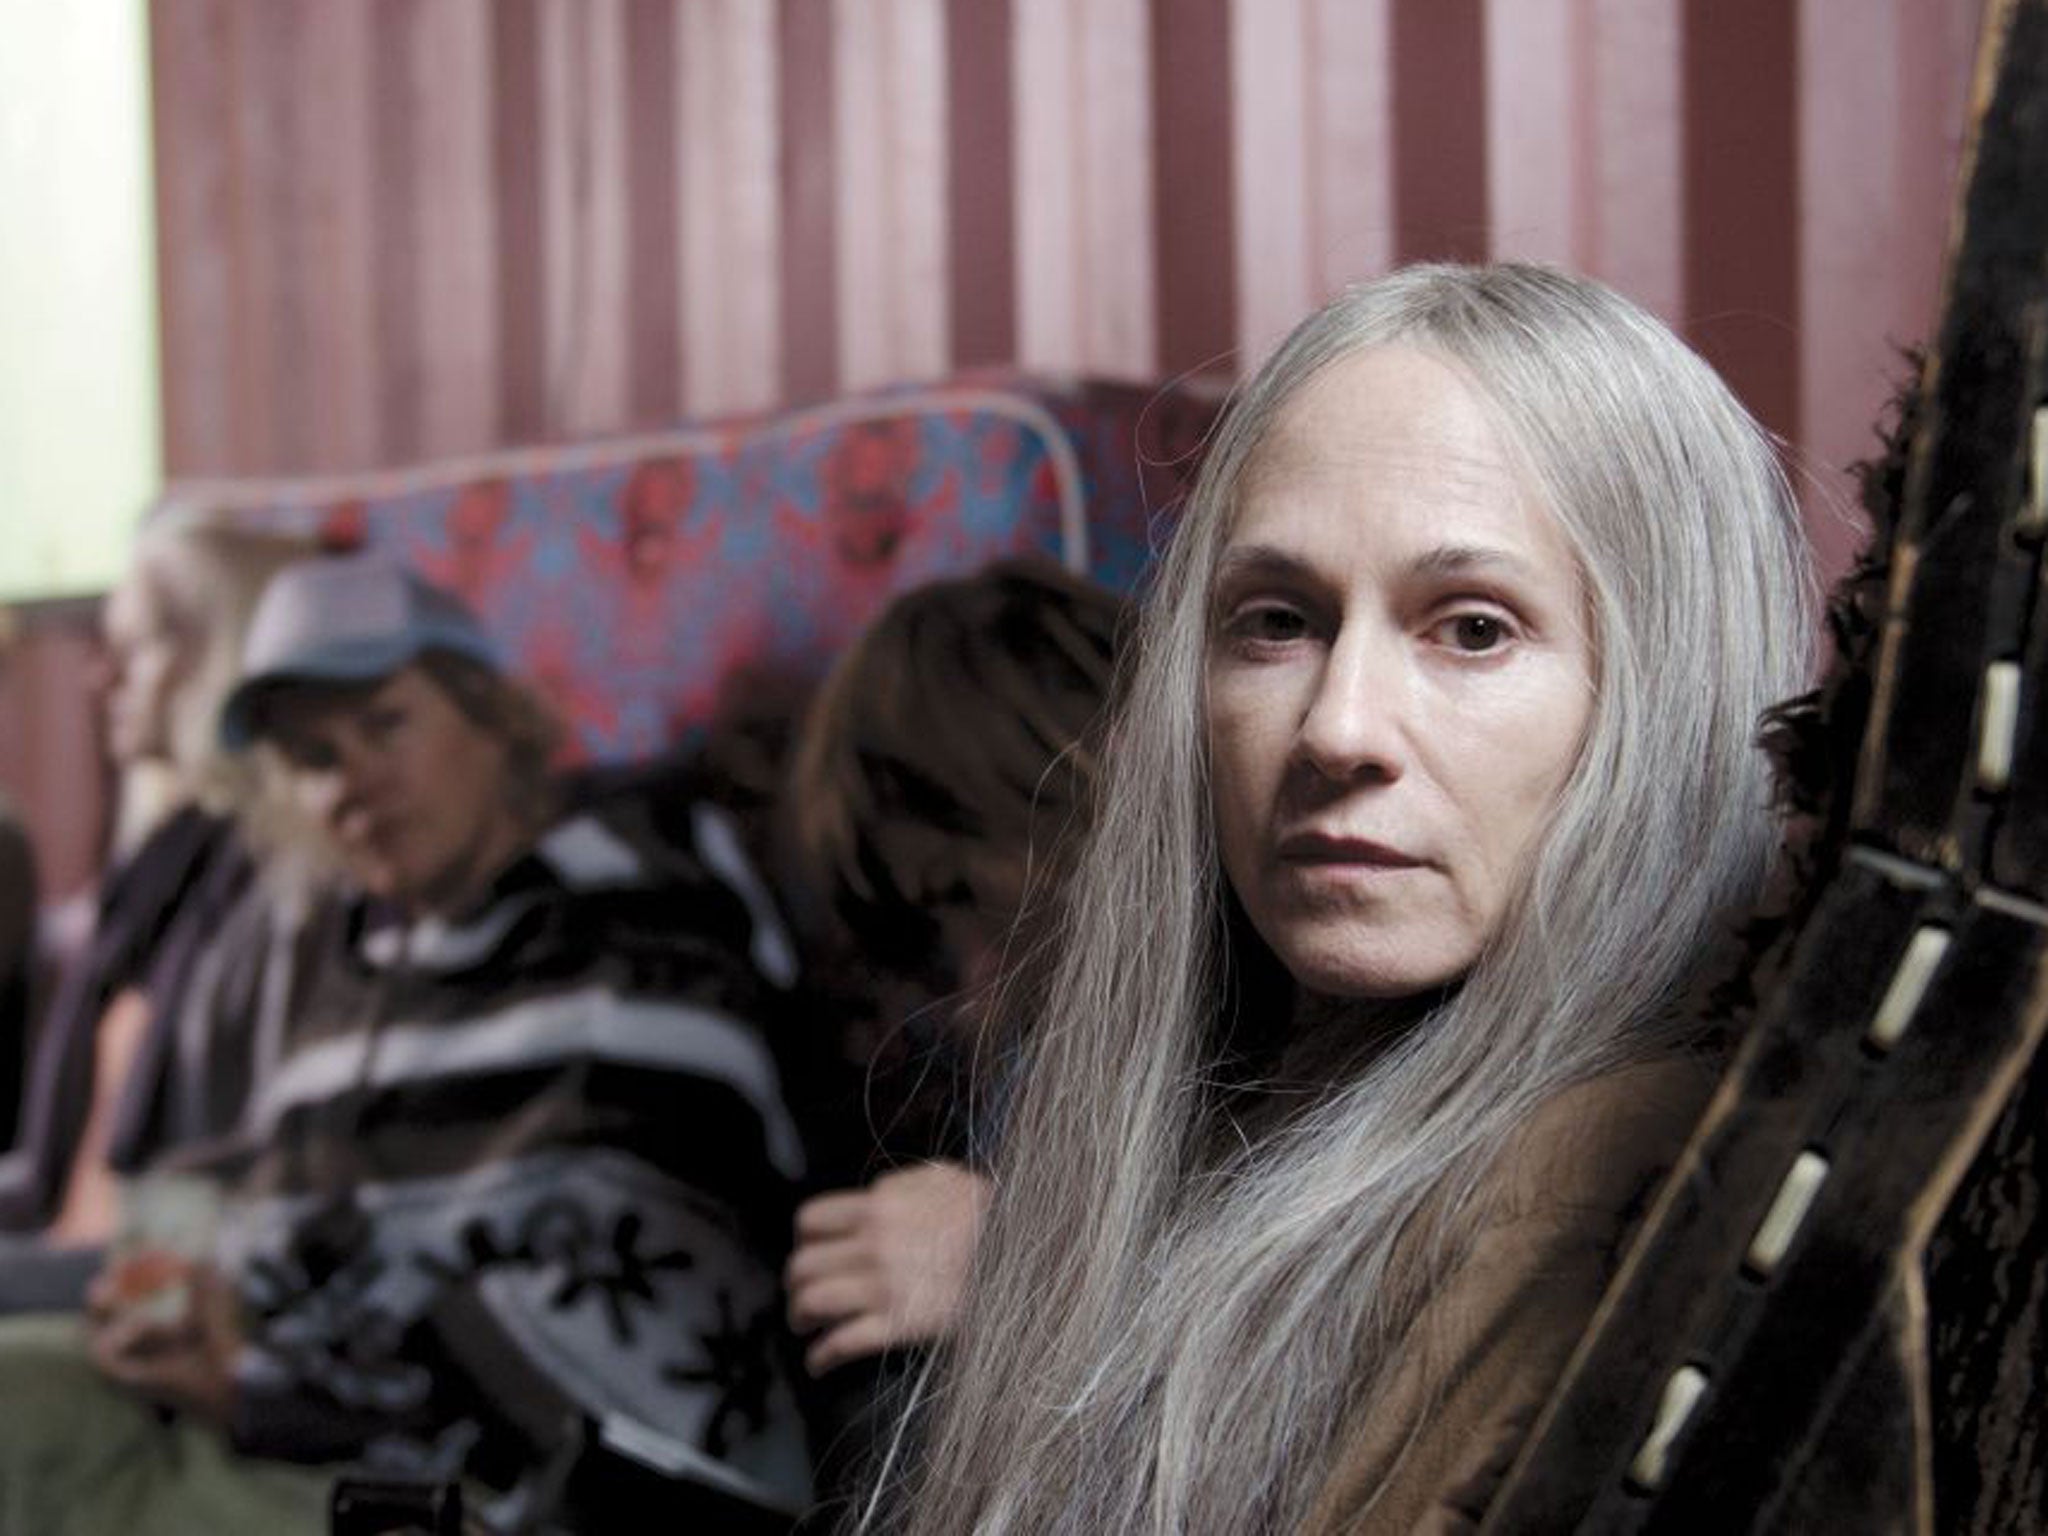 A shore thing: Holly Hunter in ‘Top of the Lake’